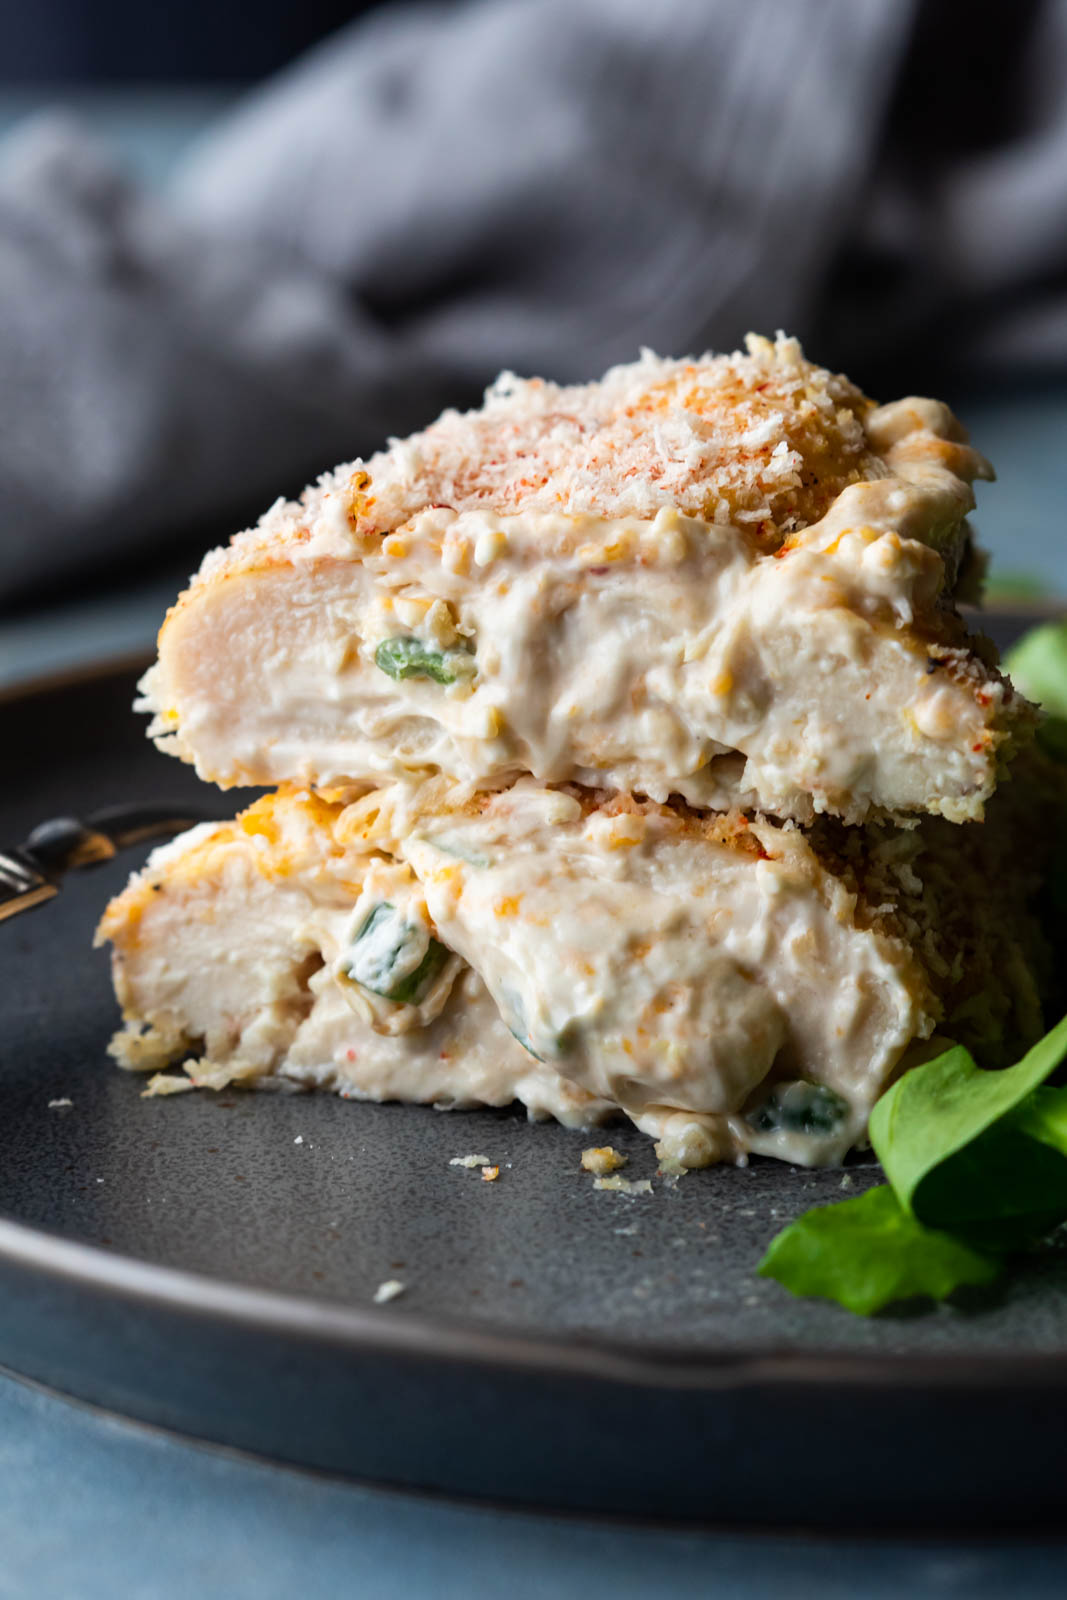 Jalapeno popper stuffed chicken sliced in half with filling and cheese oozing out